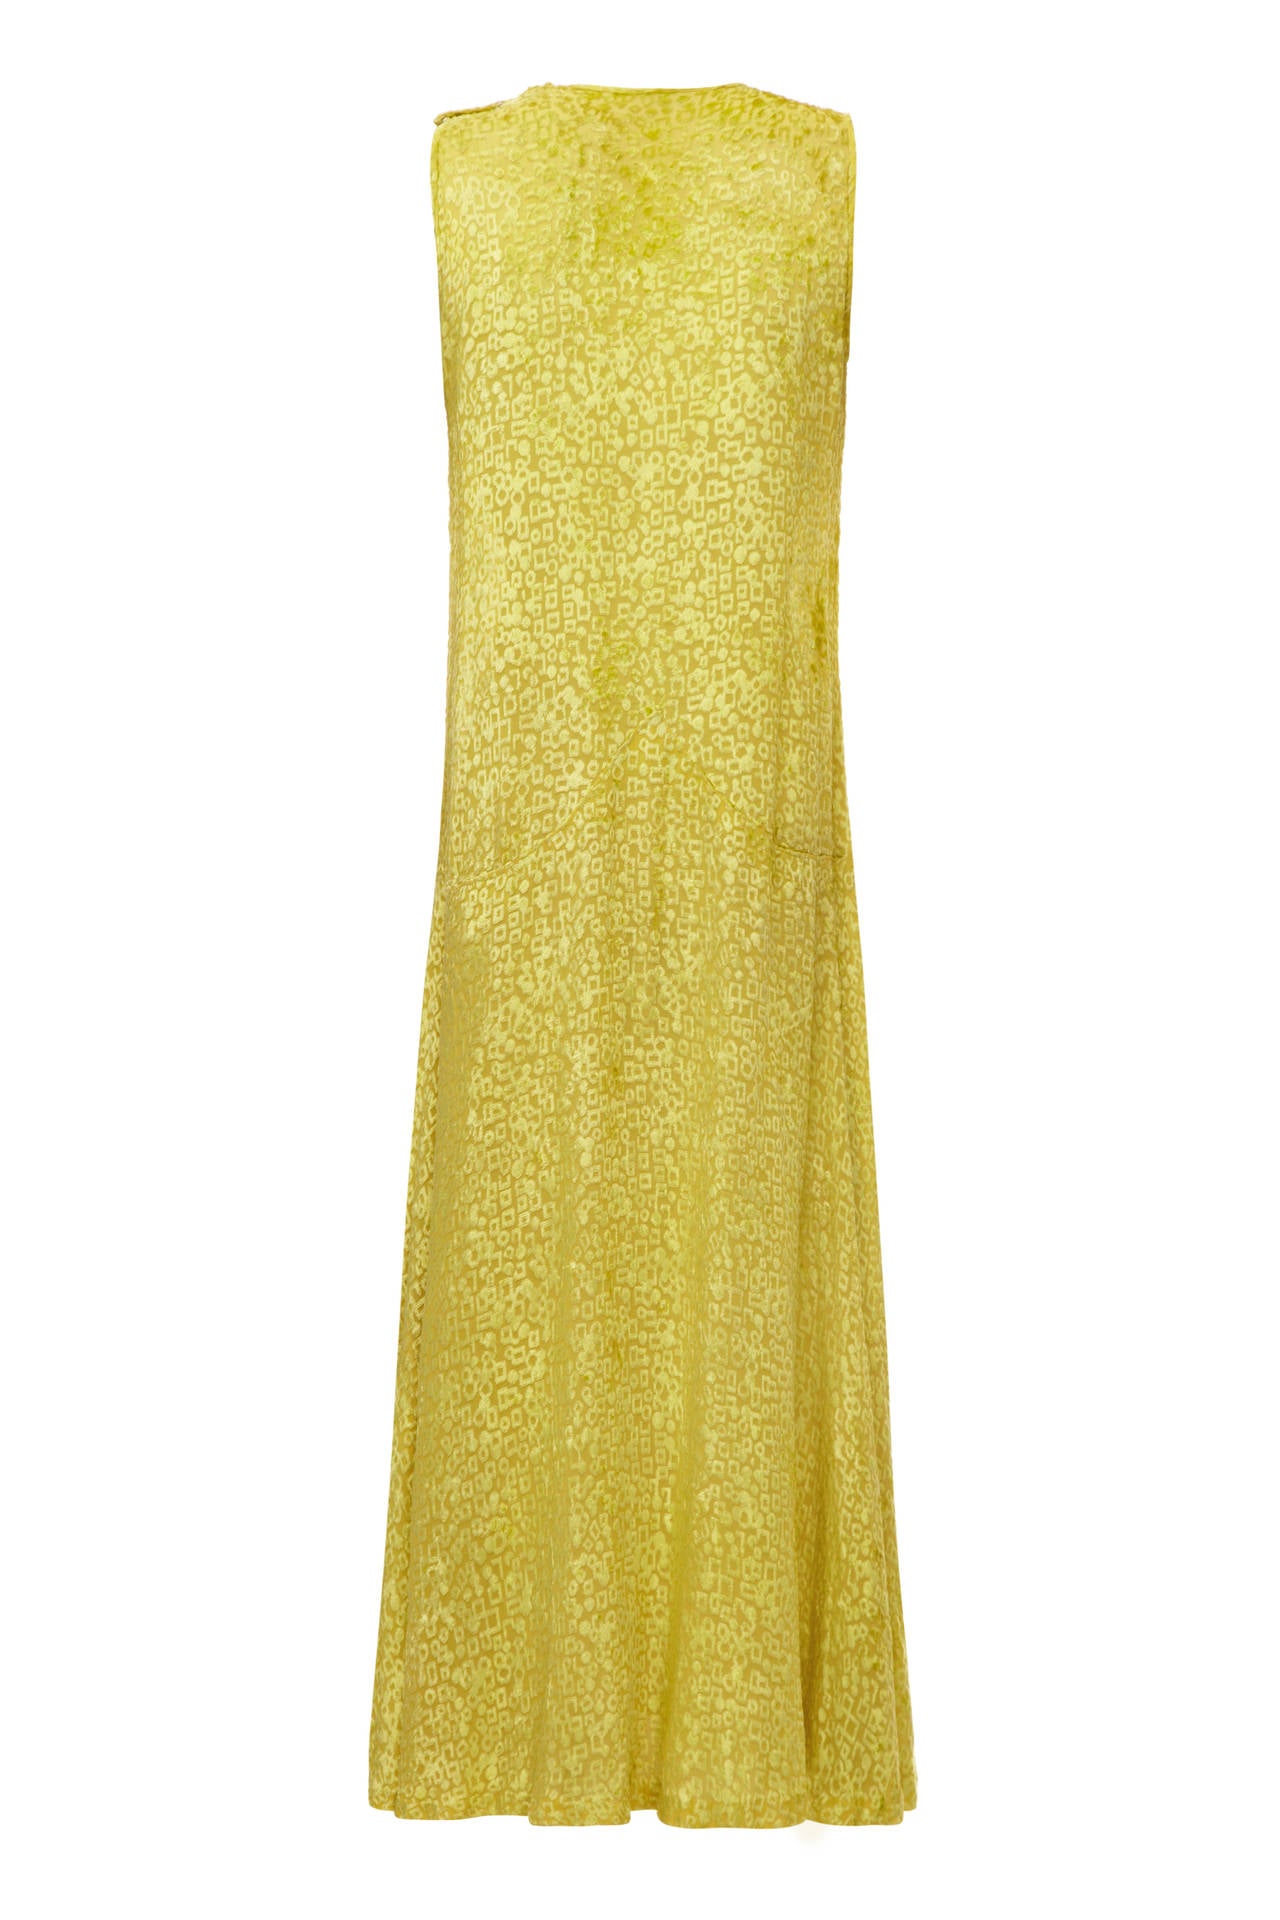 This gorgeous soft golden yellow velvet panne silk flapper dress is a really lovely example of 1920s clothing and is in superb vintage condition. The velvet of the dress has an intricate abstract design that has been meticulously burnt into the